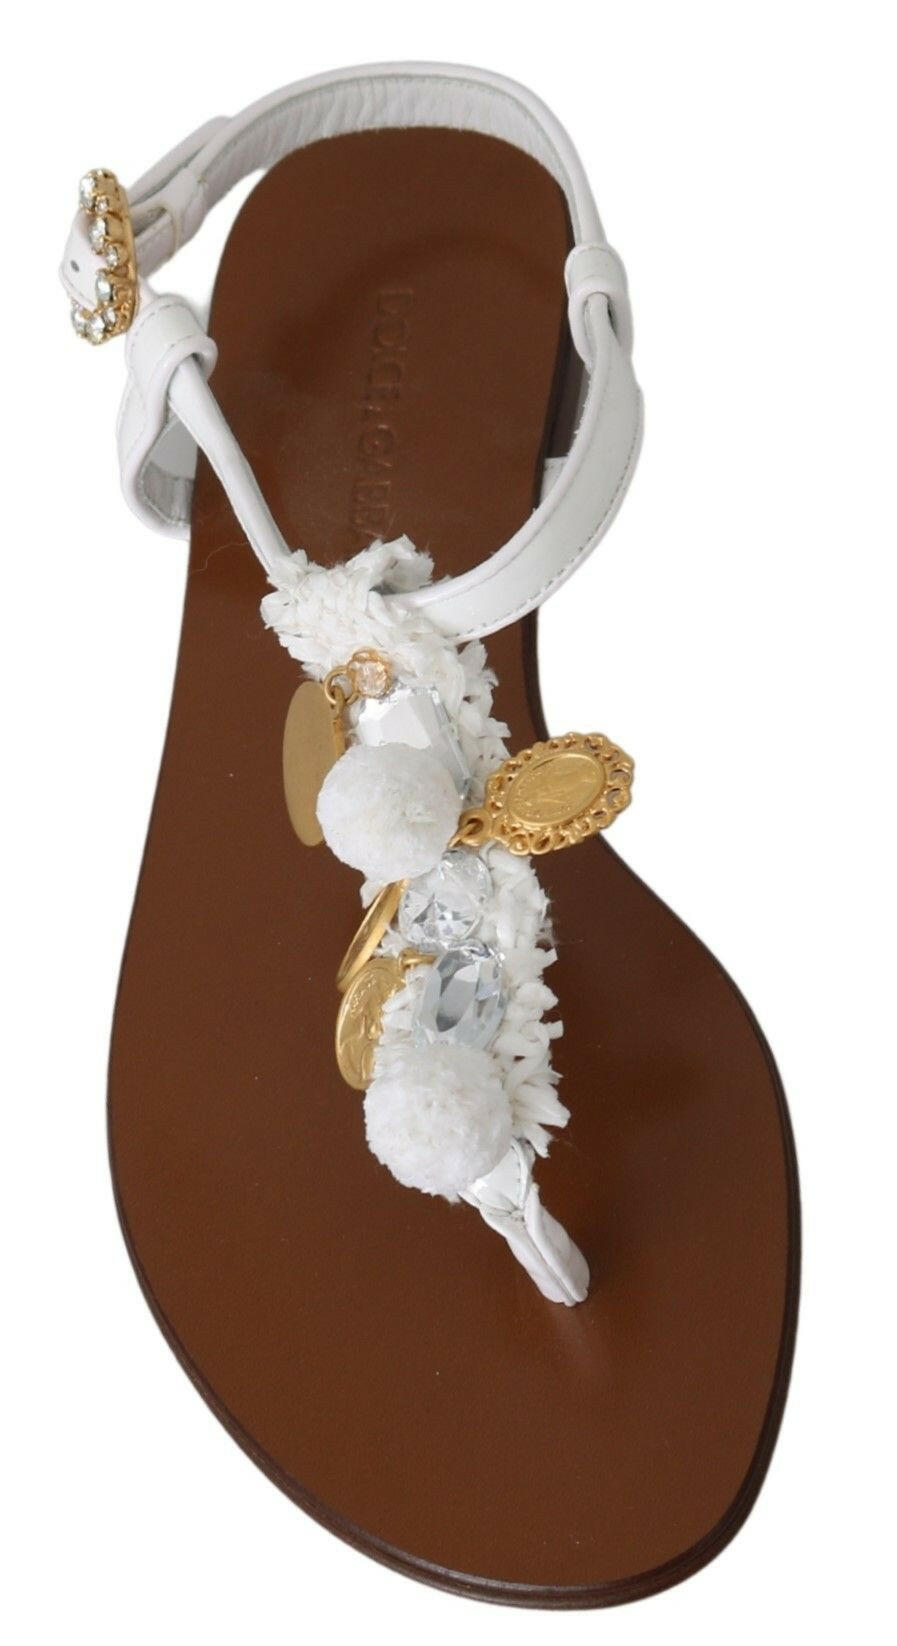 Dolce & Gabbana White Leather Coins Flip Flops Sandals Shoes - GENUINE AUTHENTIC BRAND LLC  